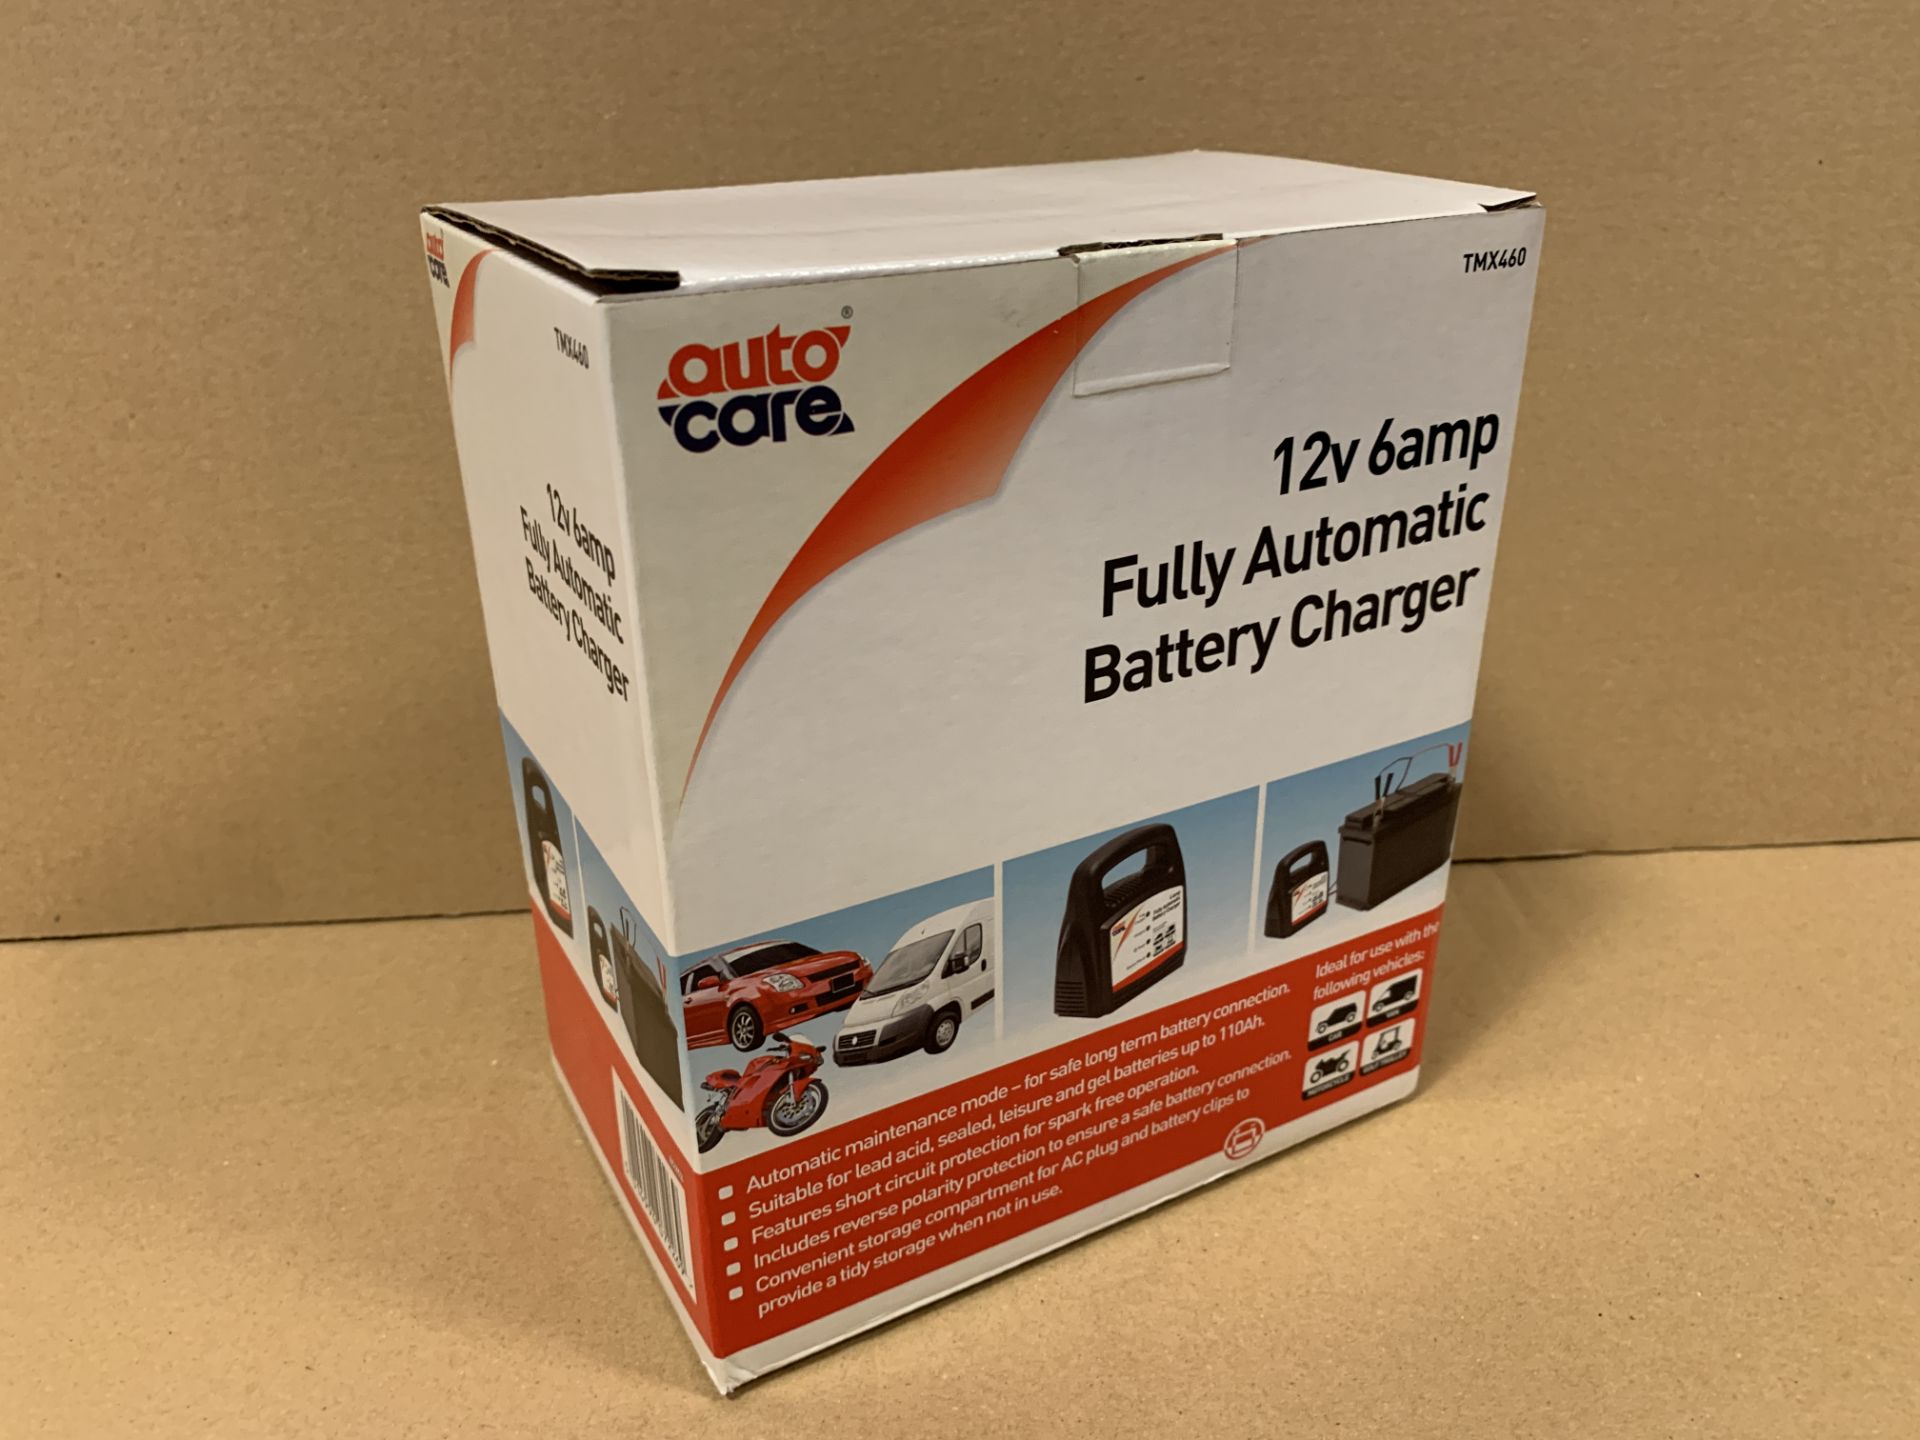 8 X BRAND NEW 12V 6AMP FULLY AUTOMATIC BATTERY CHARGERS